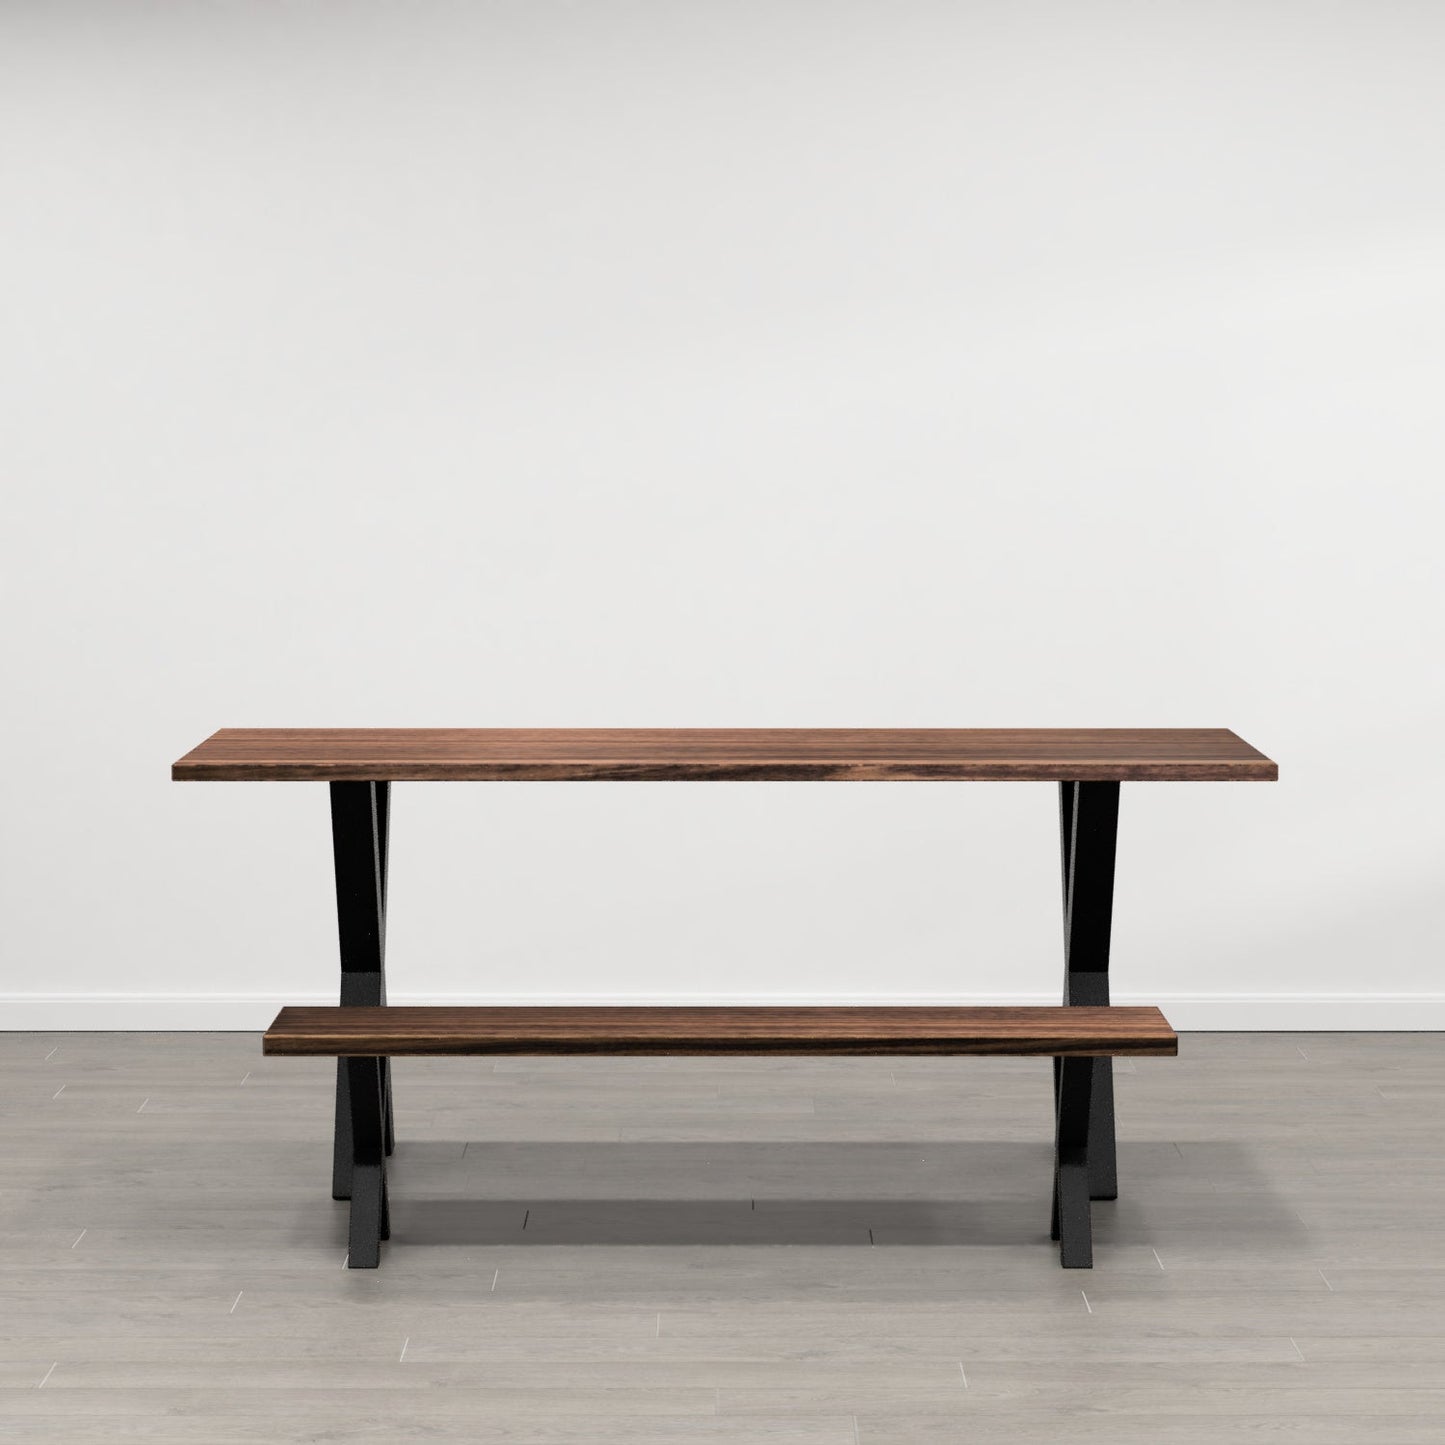 The Modern X Dining Table - FargoWoodworks